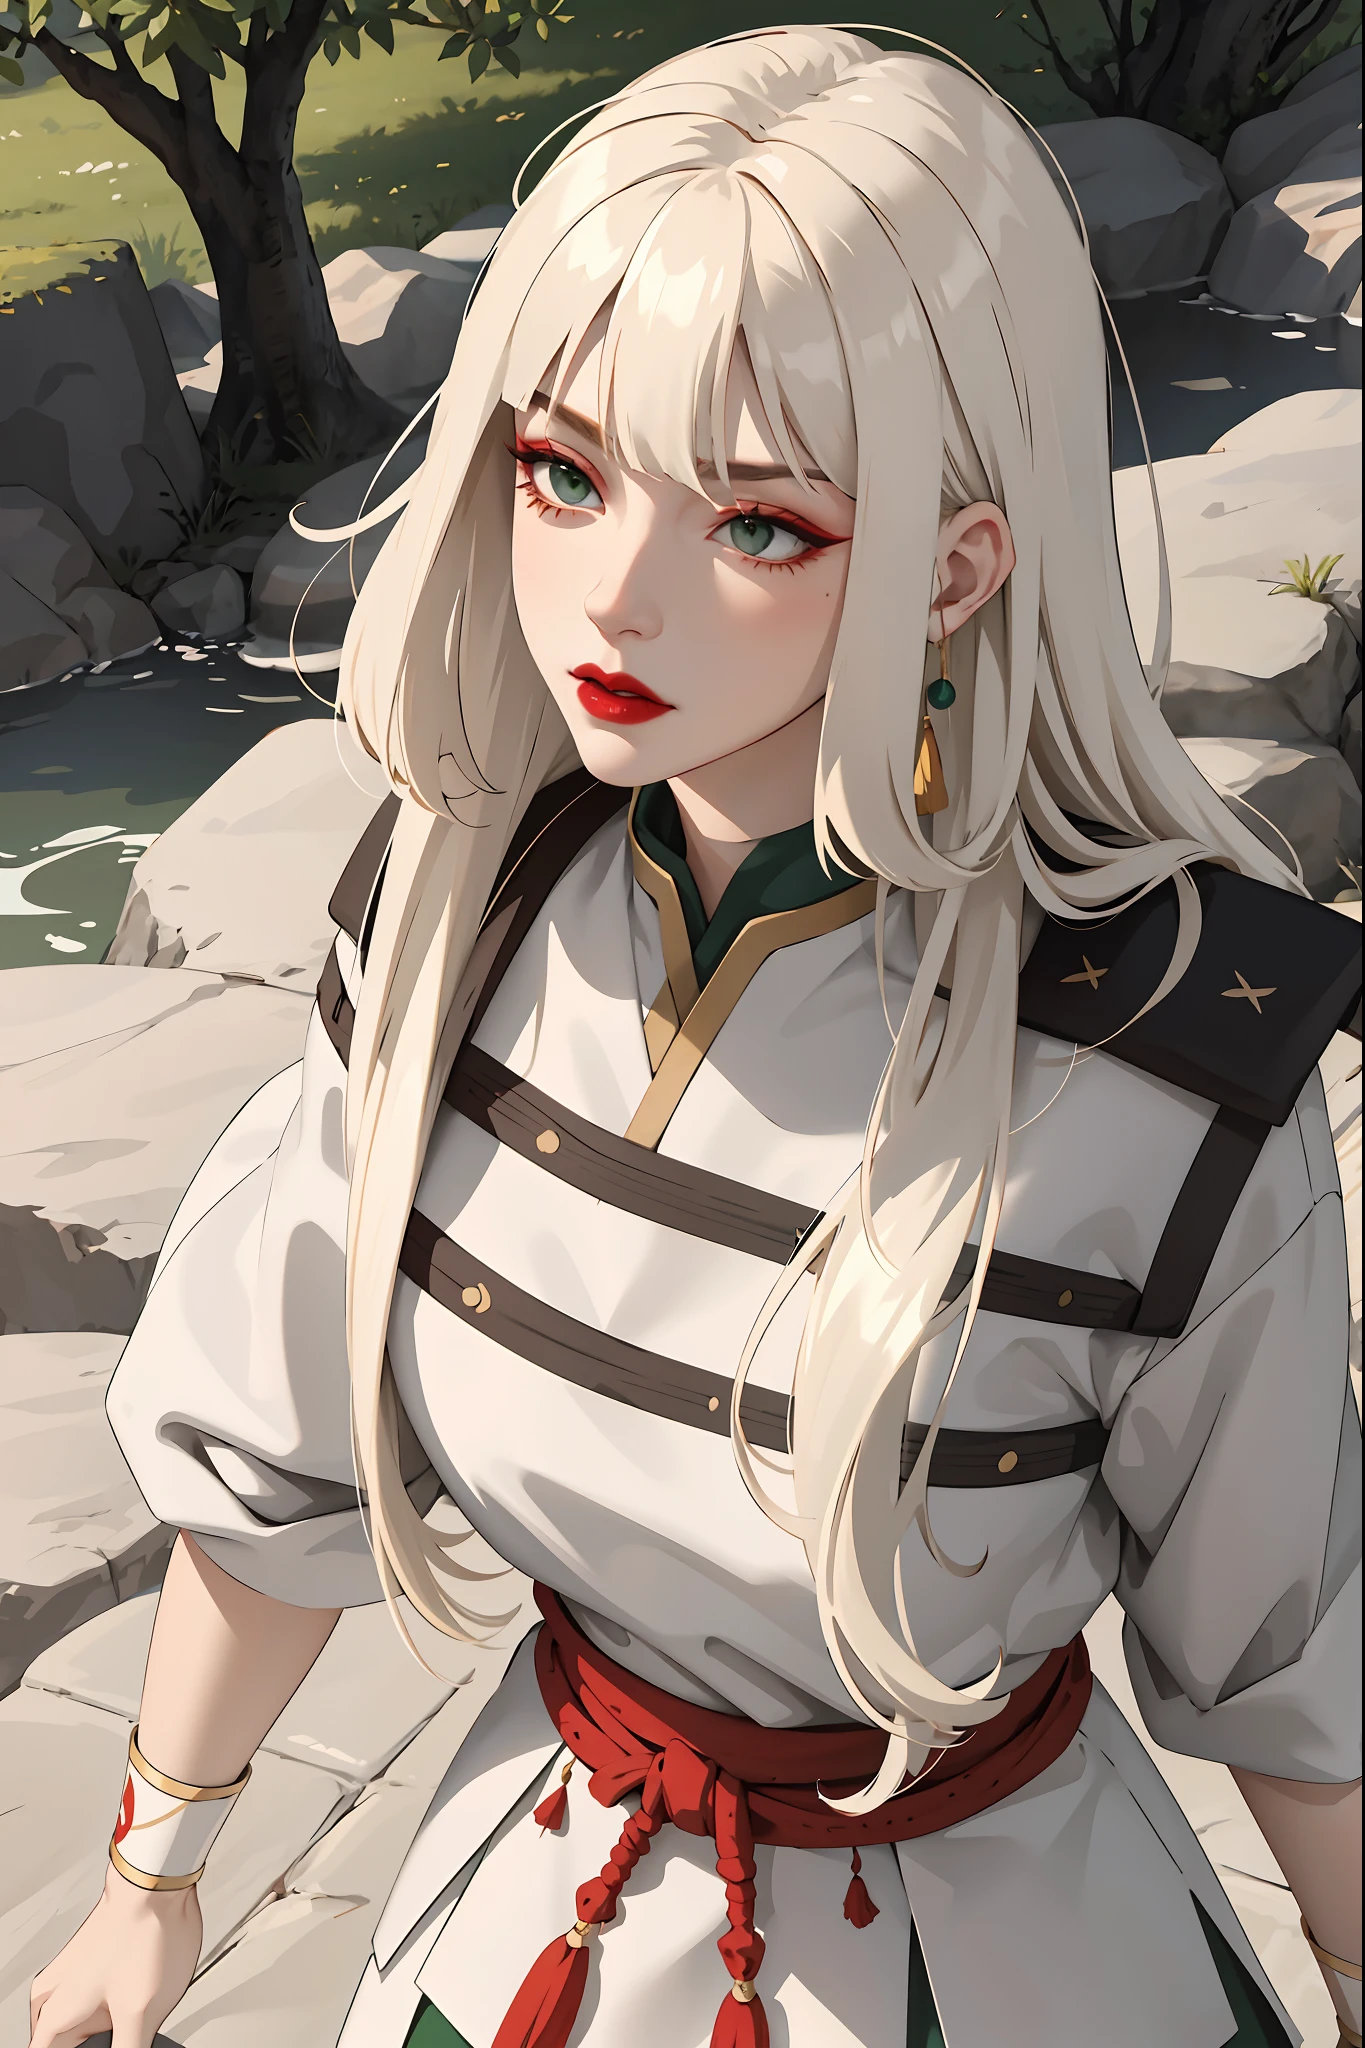 (masterpiece:1.2, best quality), (real picture, intricate details), 1lady, solo, upper body, casual, long hair, heavy makeup, white face, red lipstick, red eyeshadow, natural fabrics, close-up face, serious, warrior, female warrior, armour, really long light platinum blonde hair, platinum blonde voluminous hair, cute bangs, hair bangs, bangs between eyes, soft bangs on forehead, green eyes, mature face, 1female, 1woman, 1beautiful girl, Kyoshi uniform, Kyoshi makeup, Kyoshi Warrior (Avatar the Last Airbender)